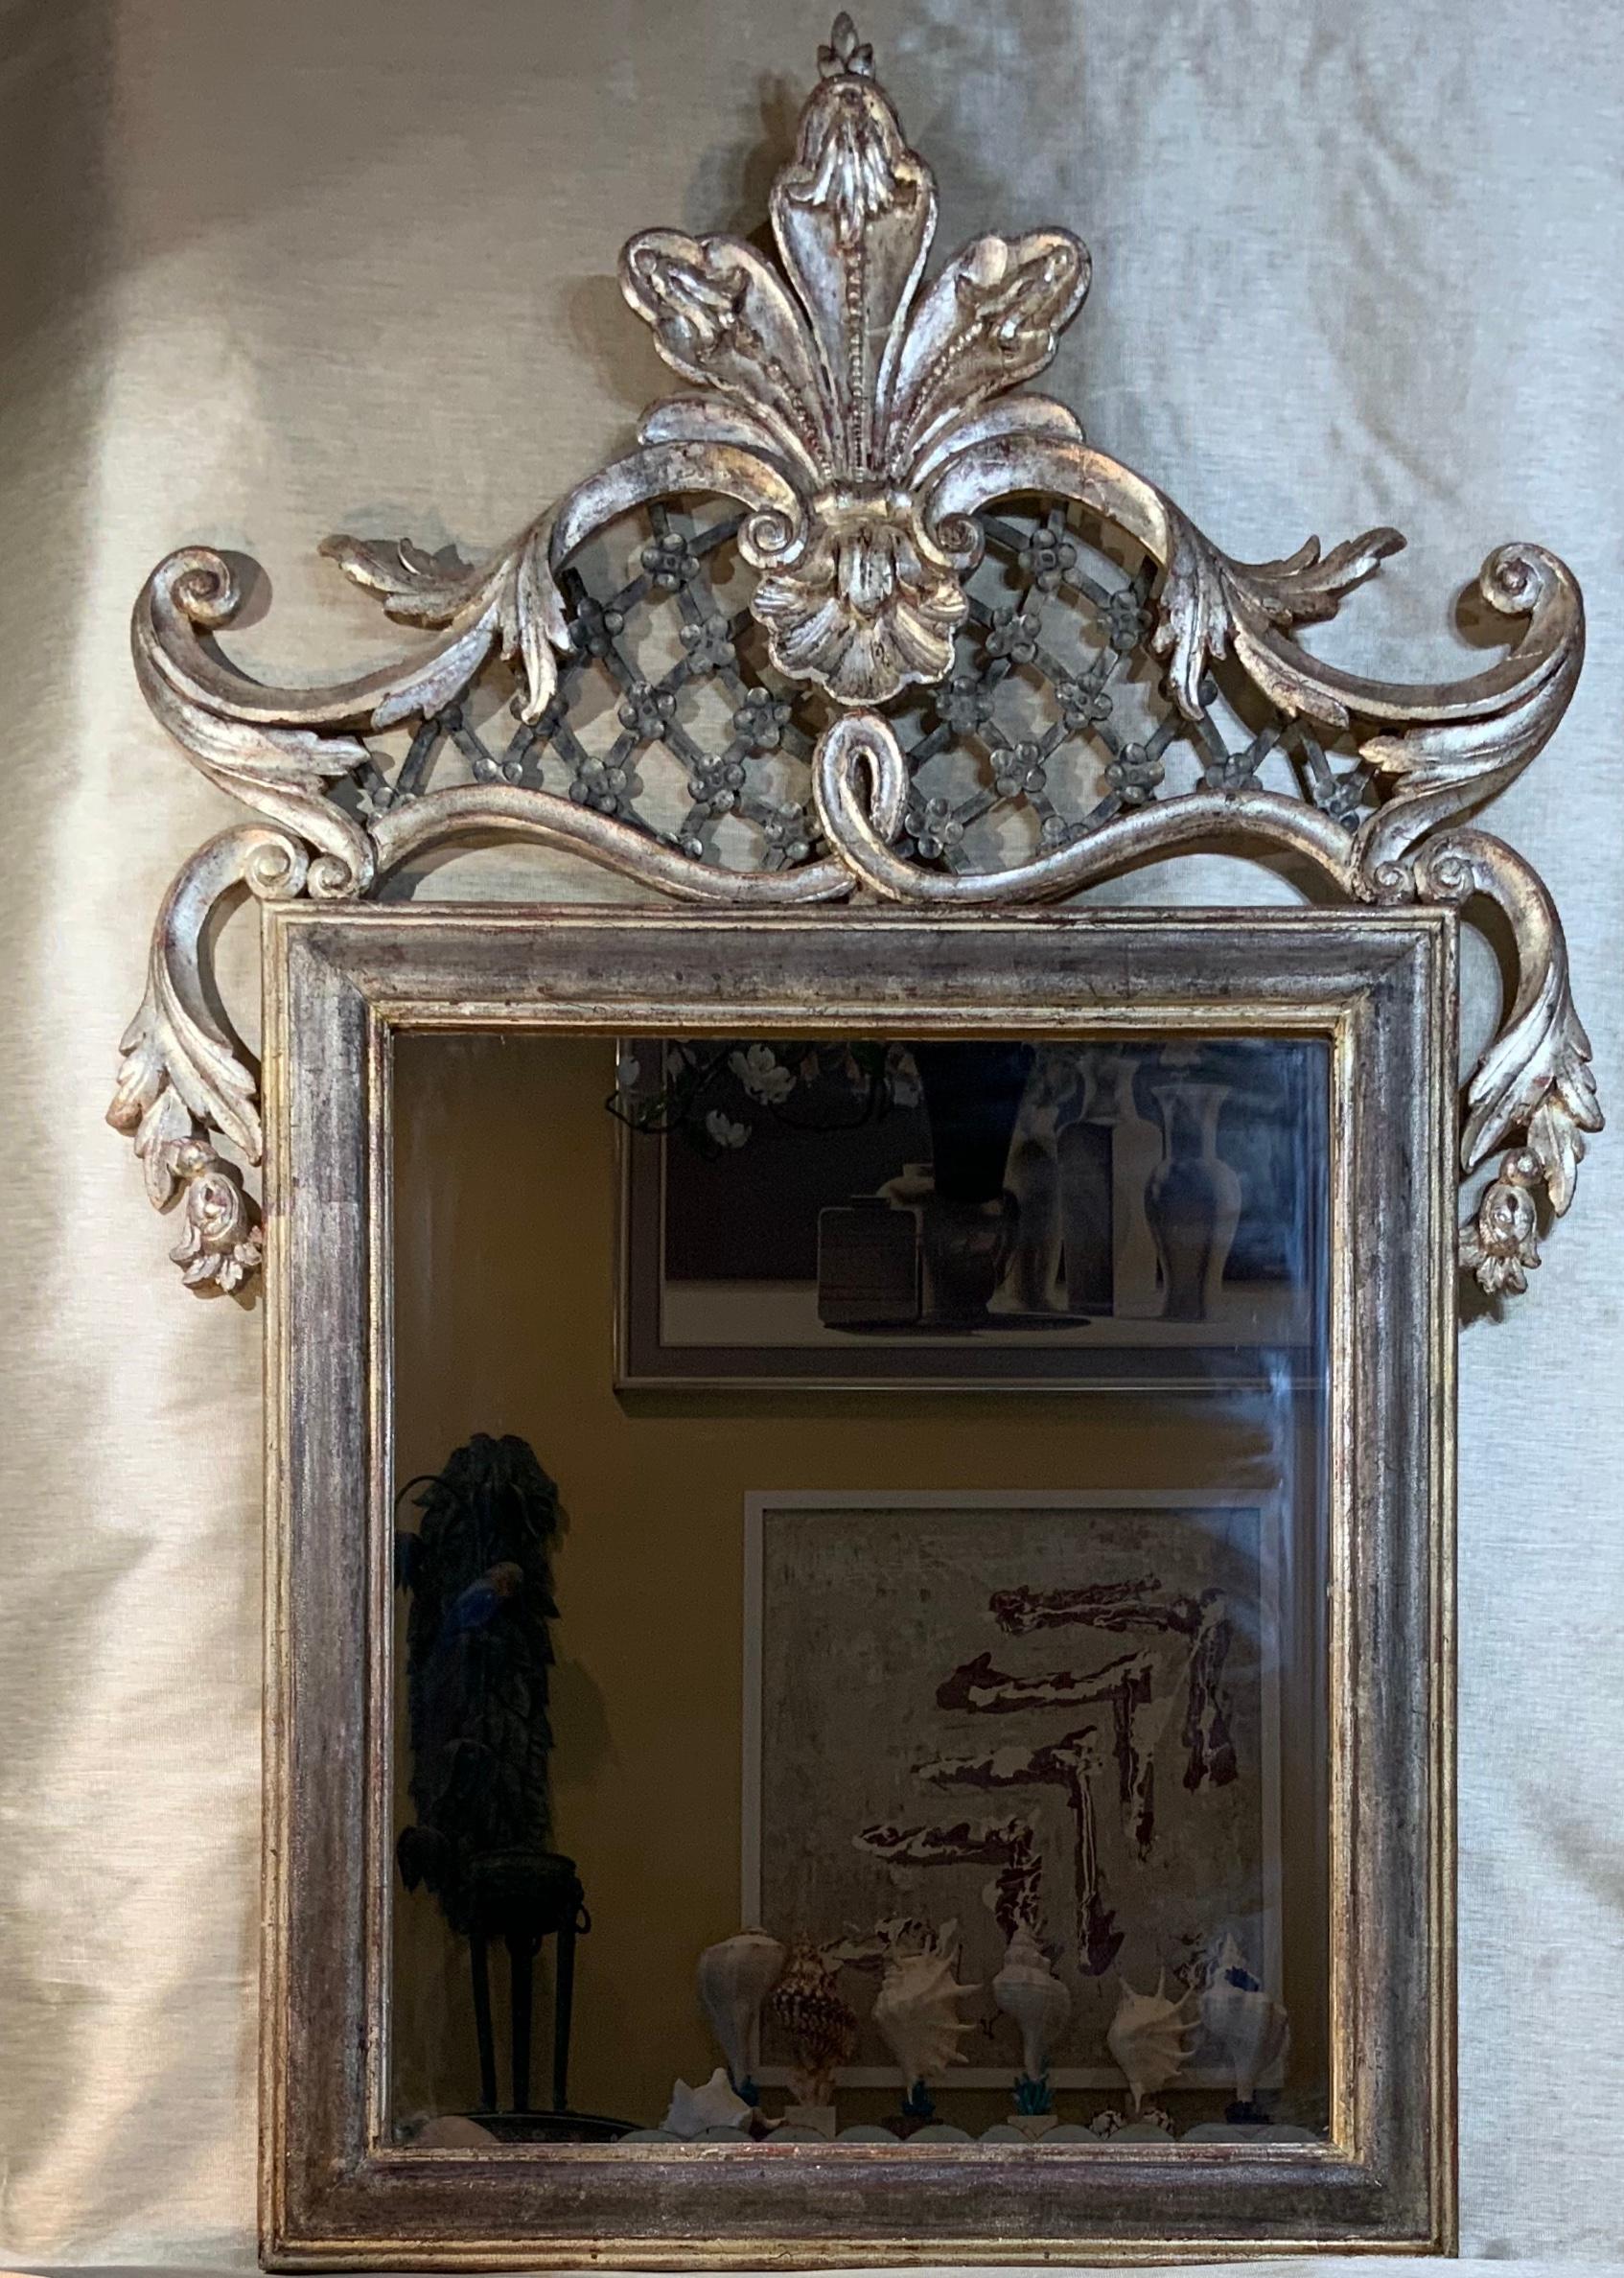 Beautiful antique hand carved wood Italian mirror with exceptional wrought iron decorative motifs.